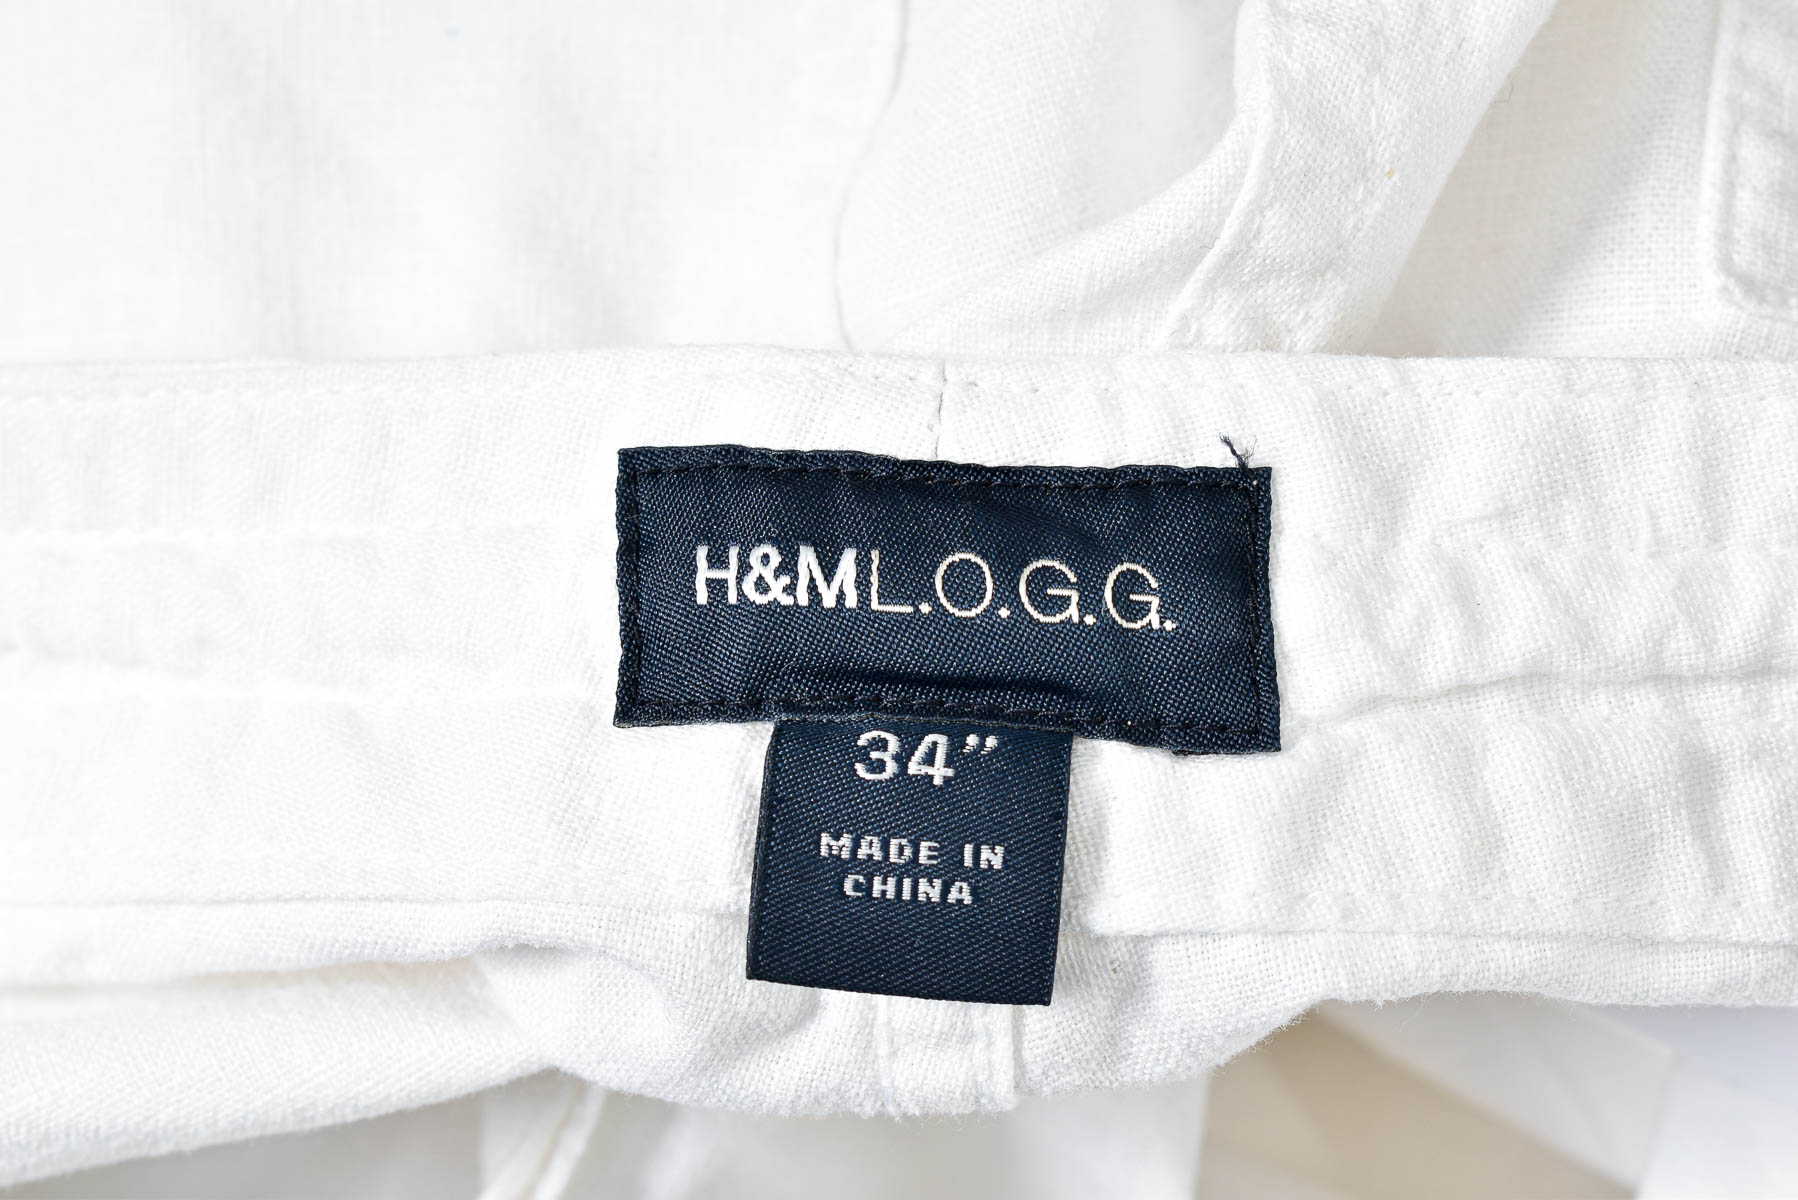 Men's trousers - L.O.G.G. by H&M - 2